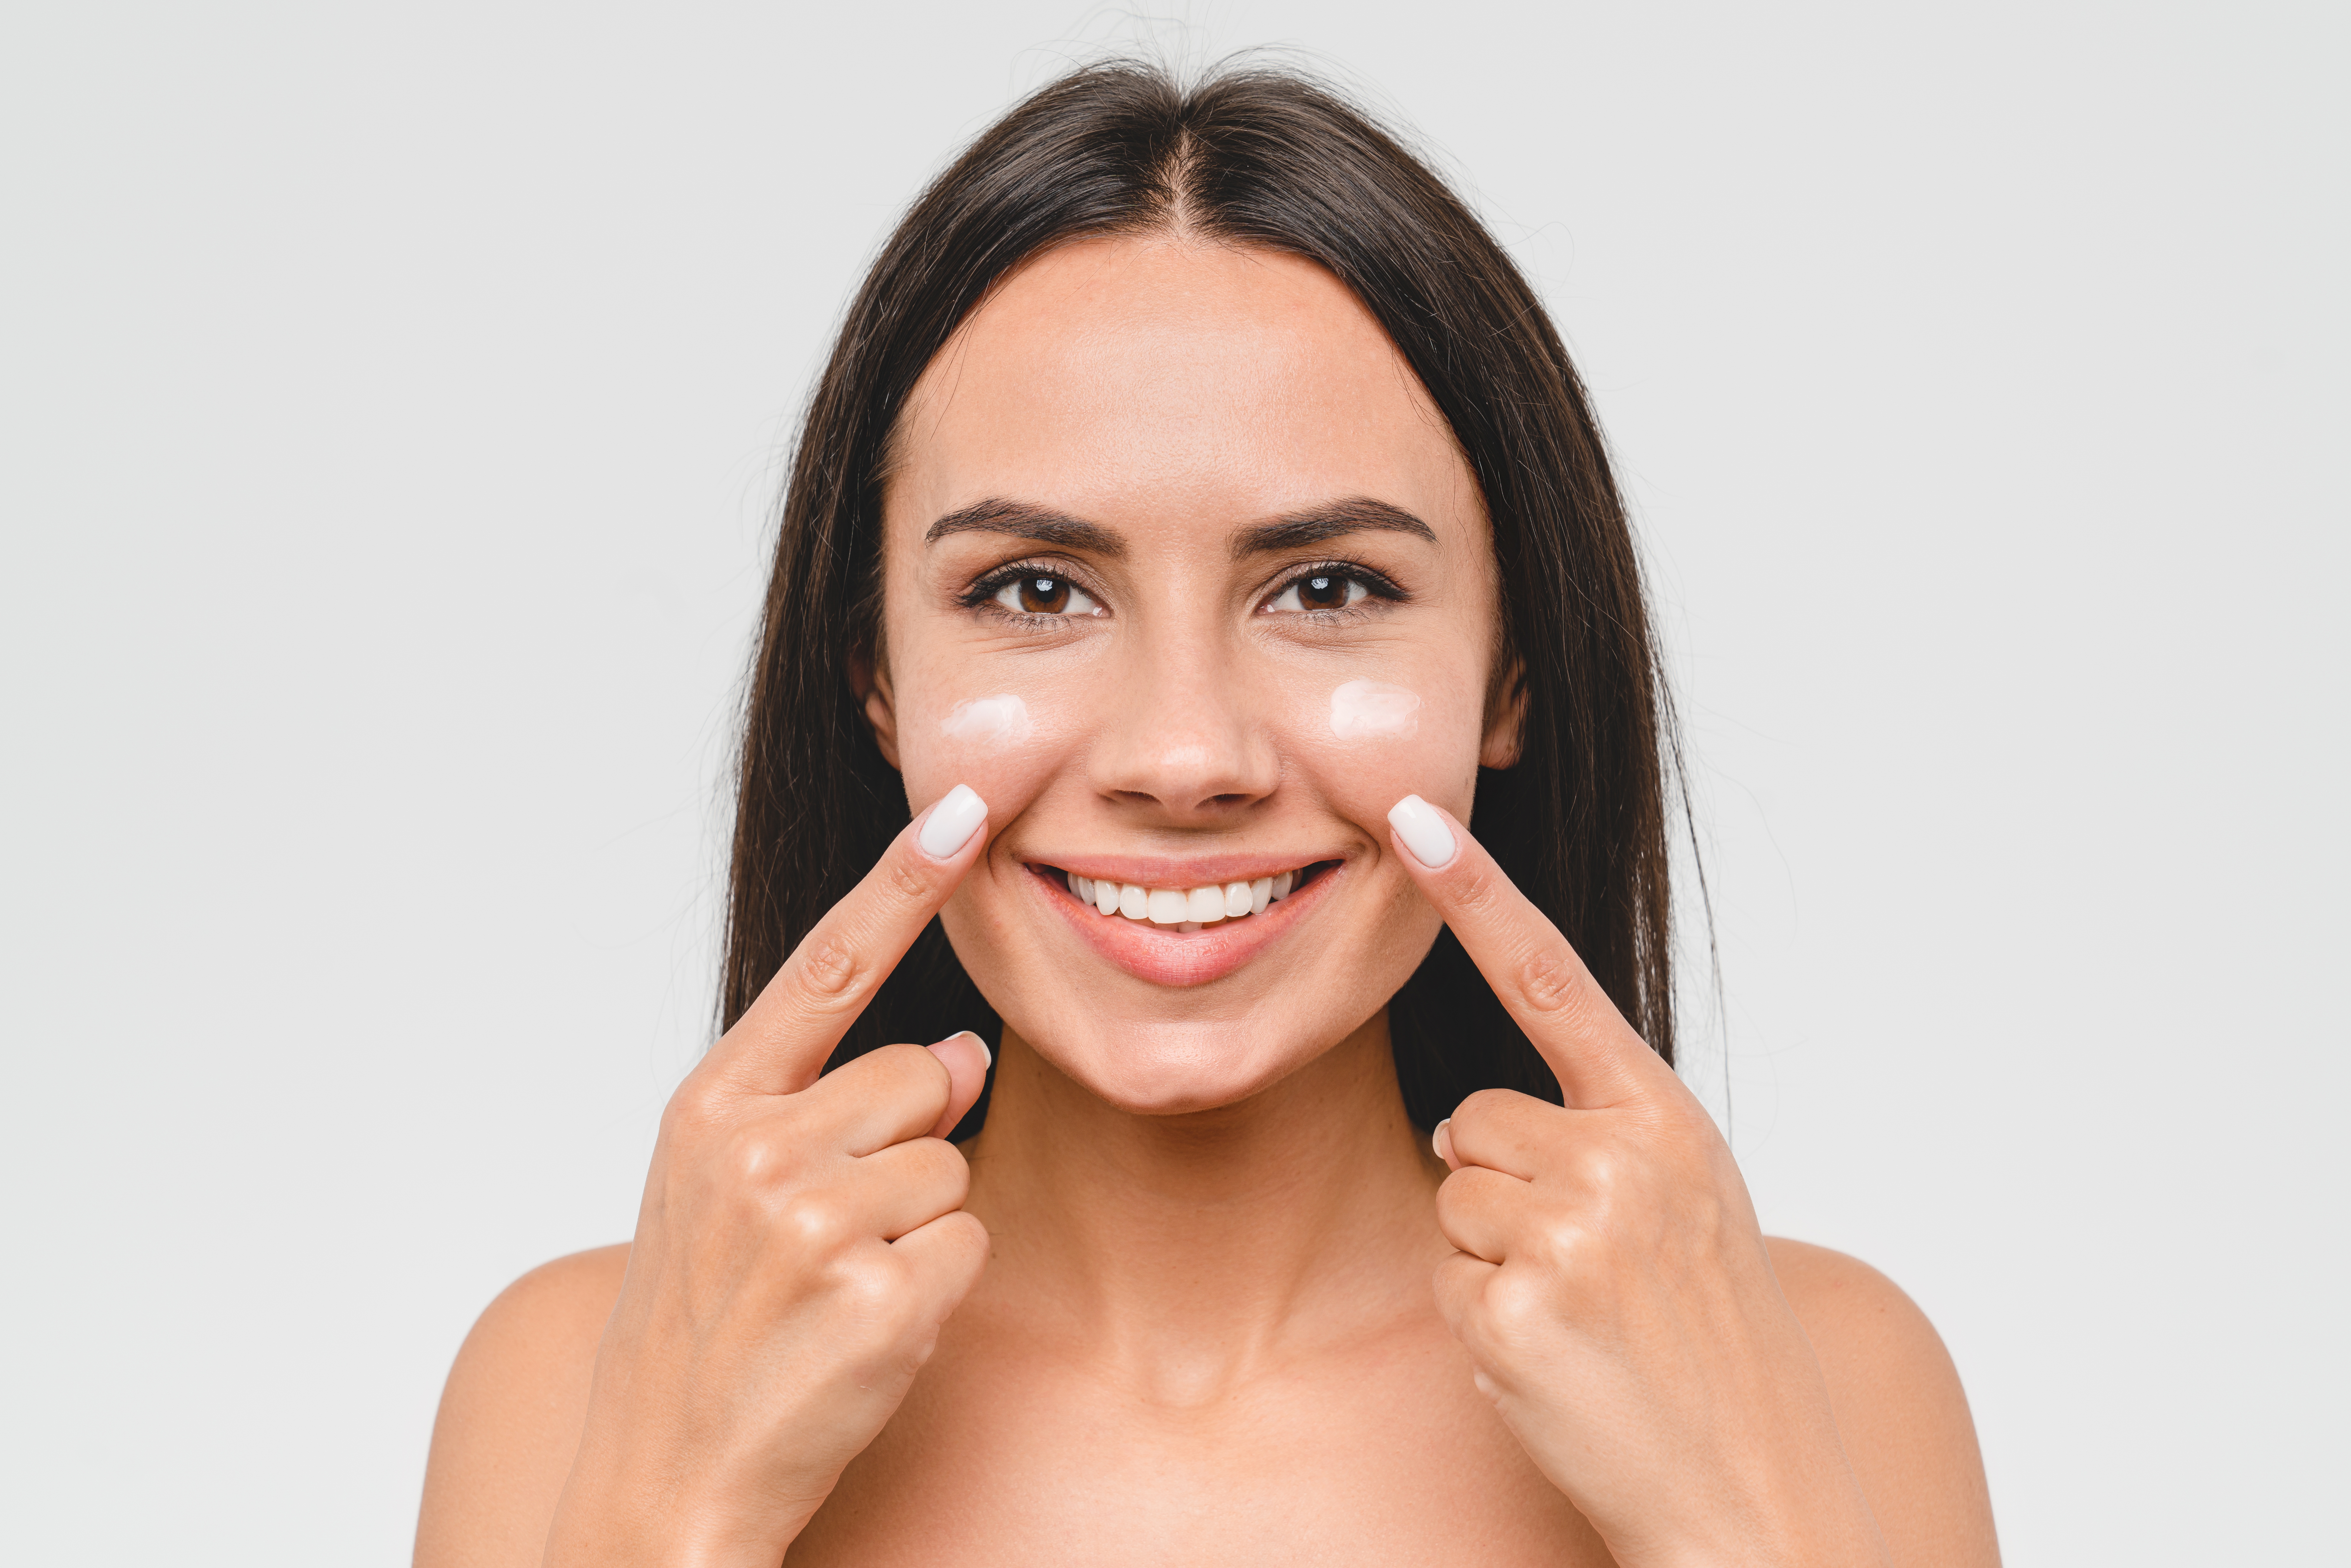 Woman with Sunscreen on her face | Source: Shutterstock